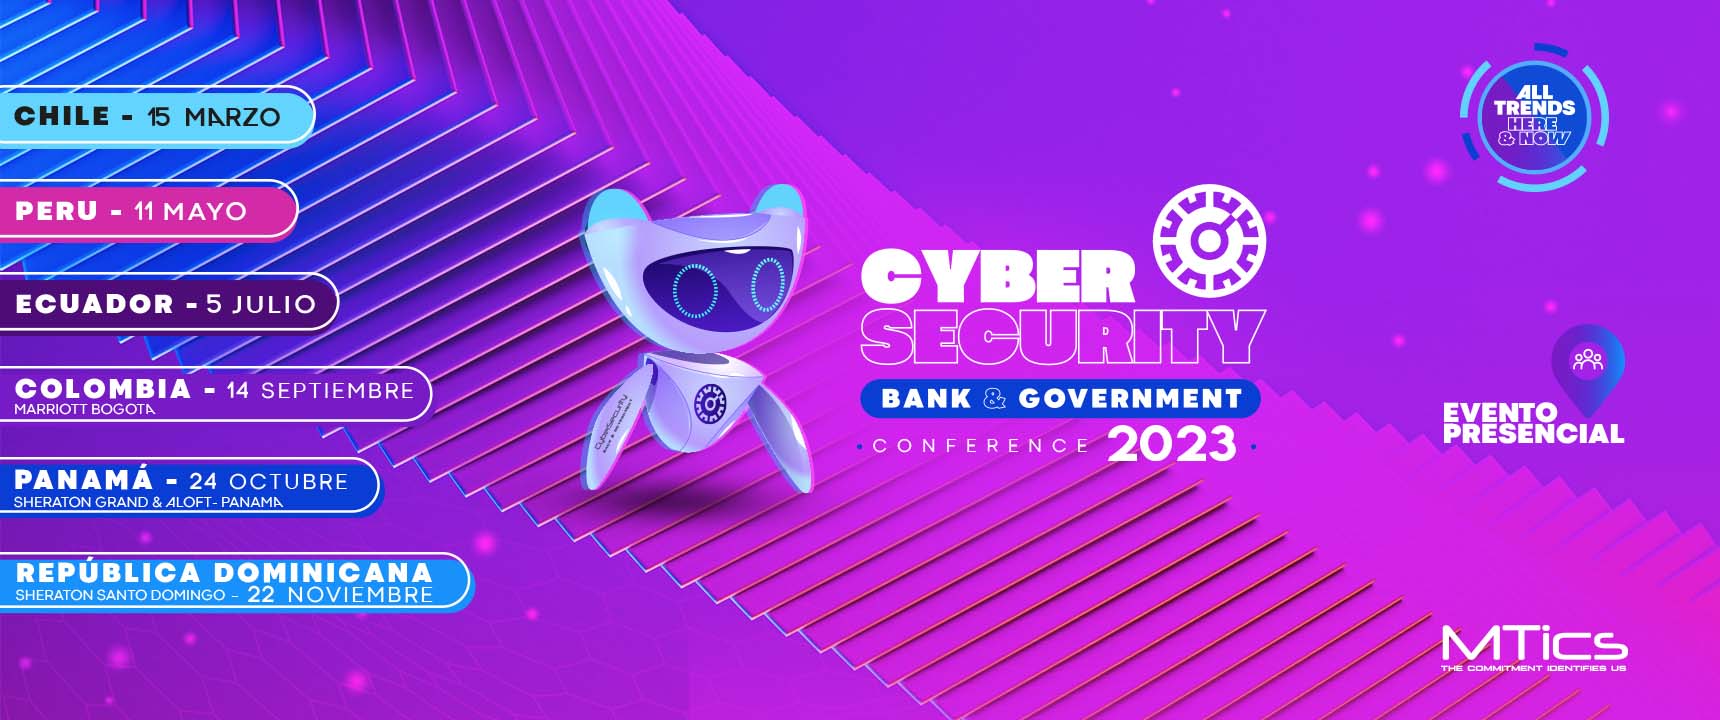 Cybersecurity Bank & Government 2023